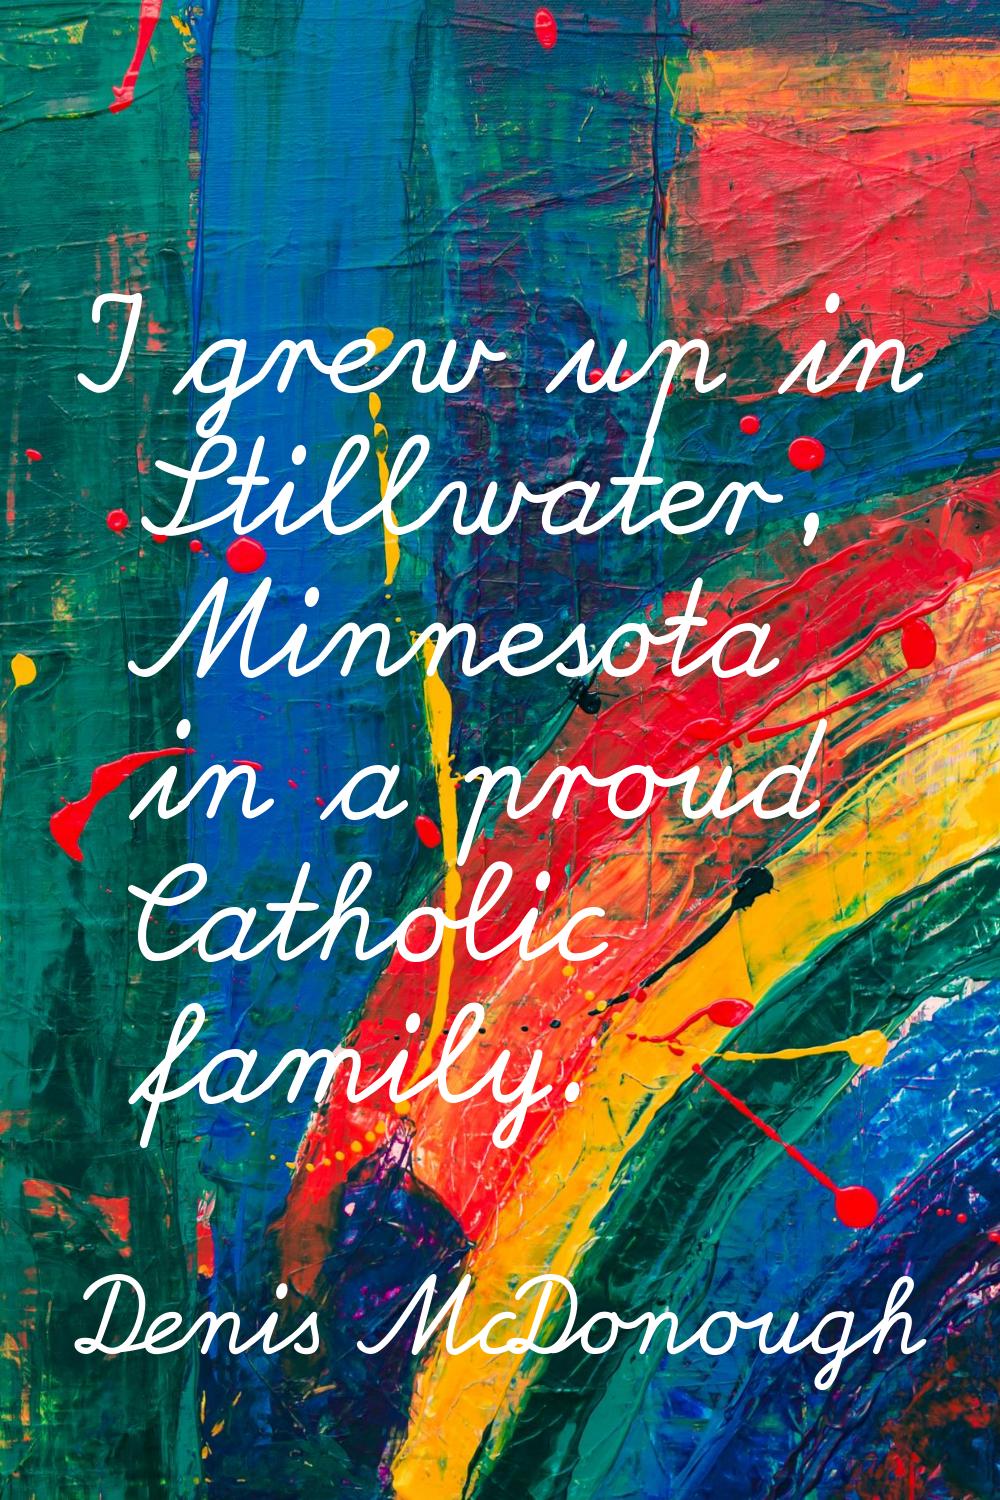 I grew up in Stillwater, Minnesota in a proud Catholic family.